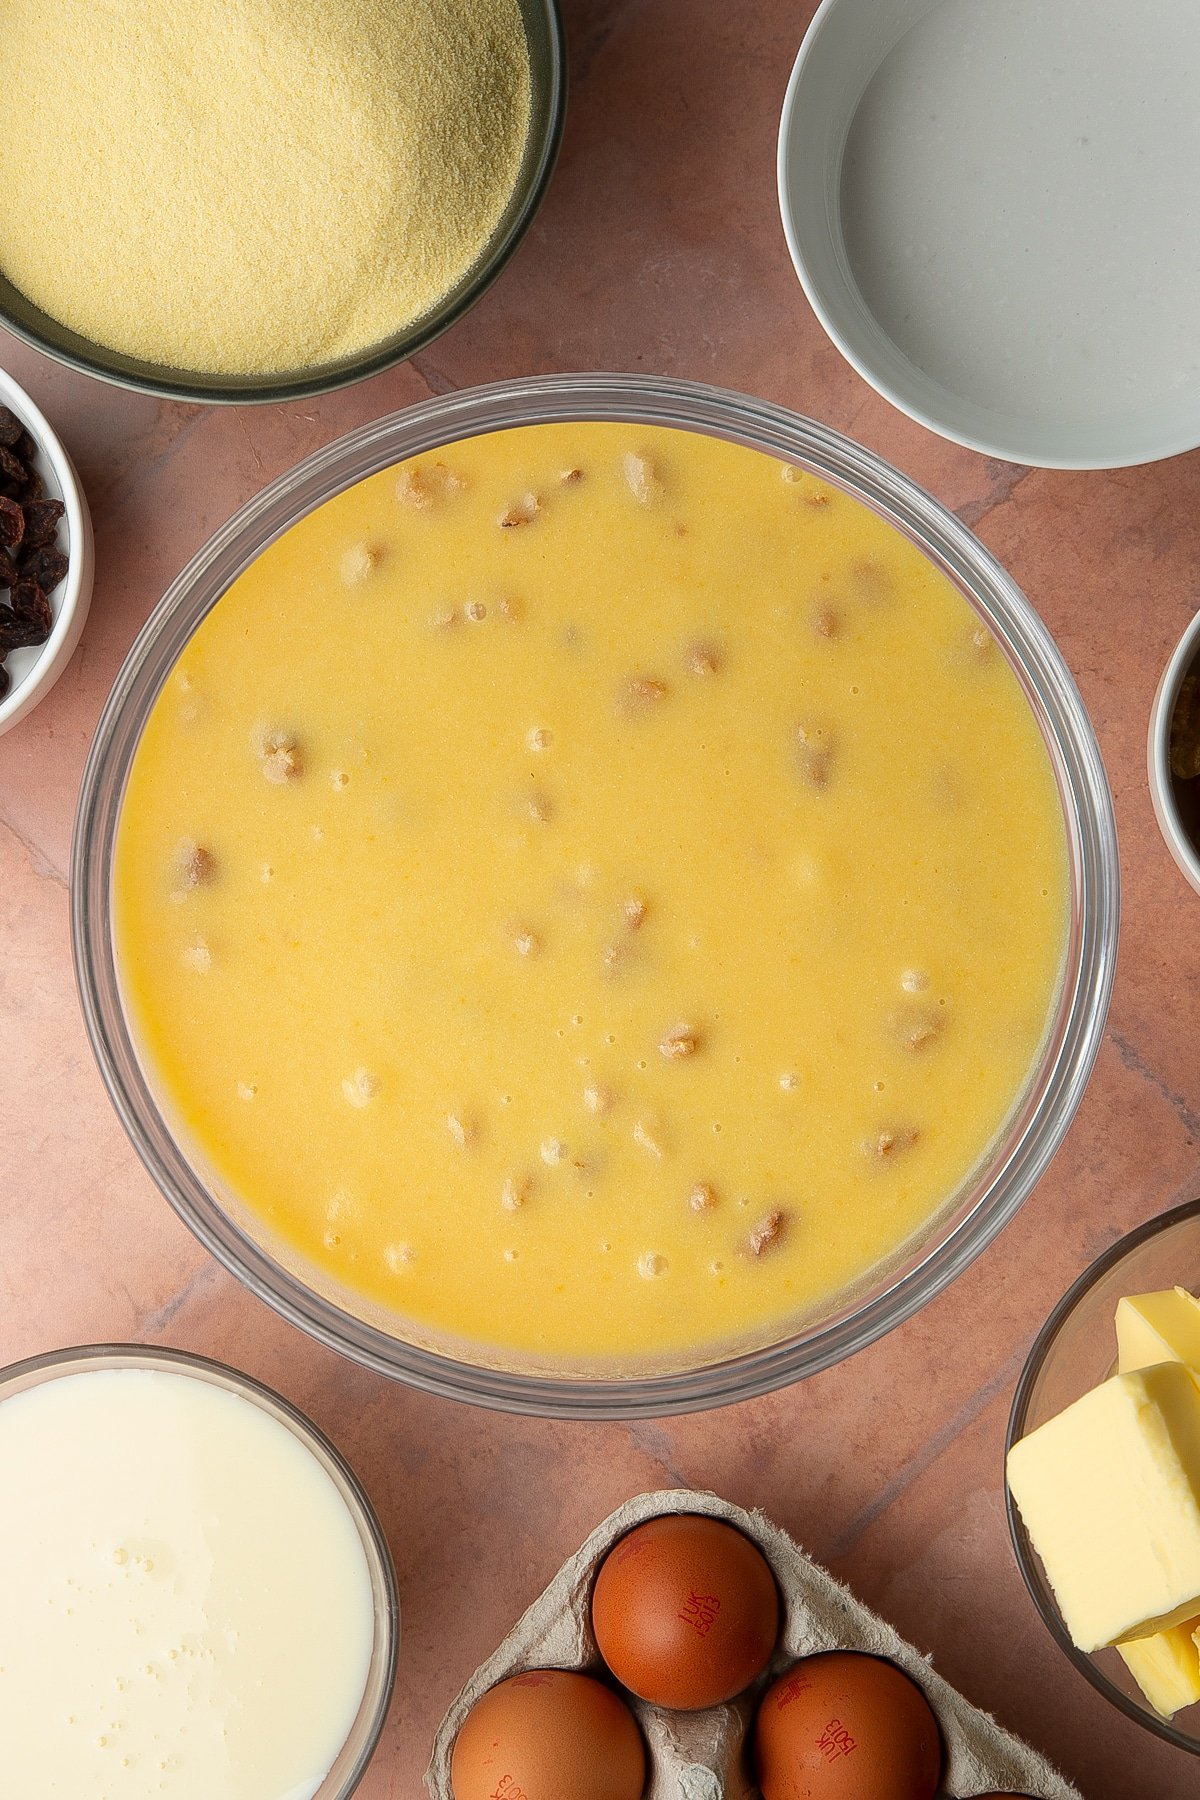 Golden semolina cake batter with raisins and walnuts in a bowl. Ingredients to make sanwin-makin surround the bowl.